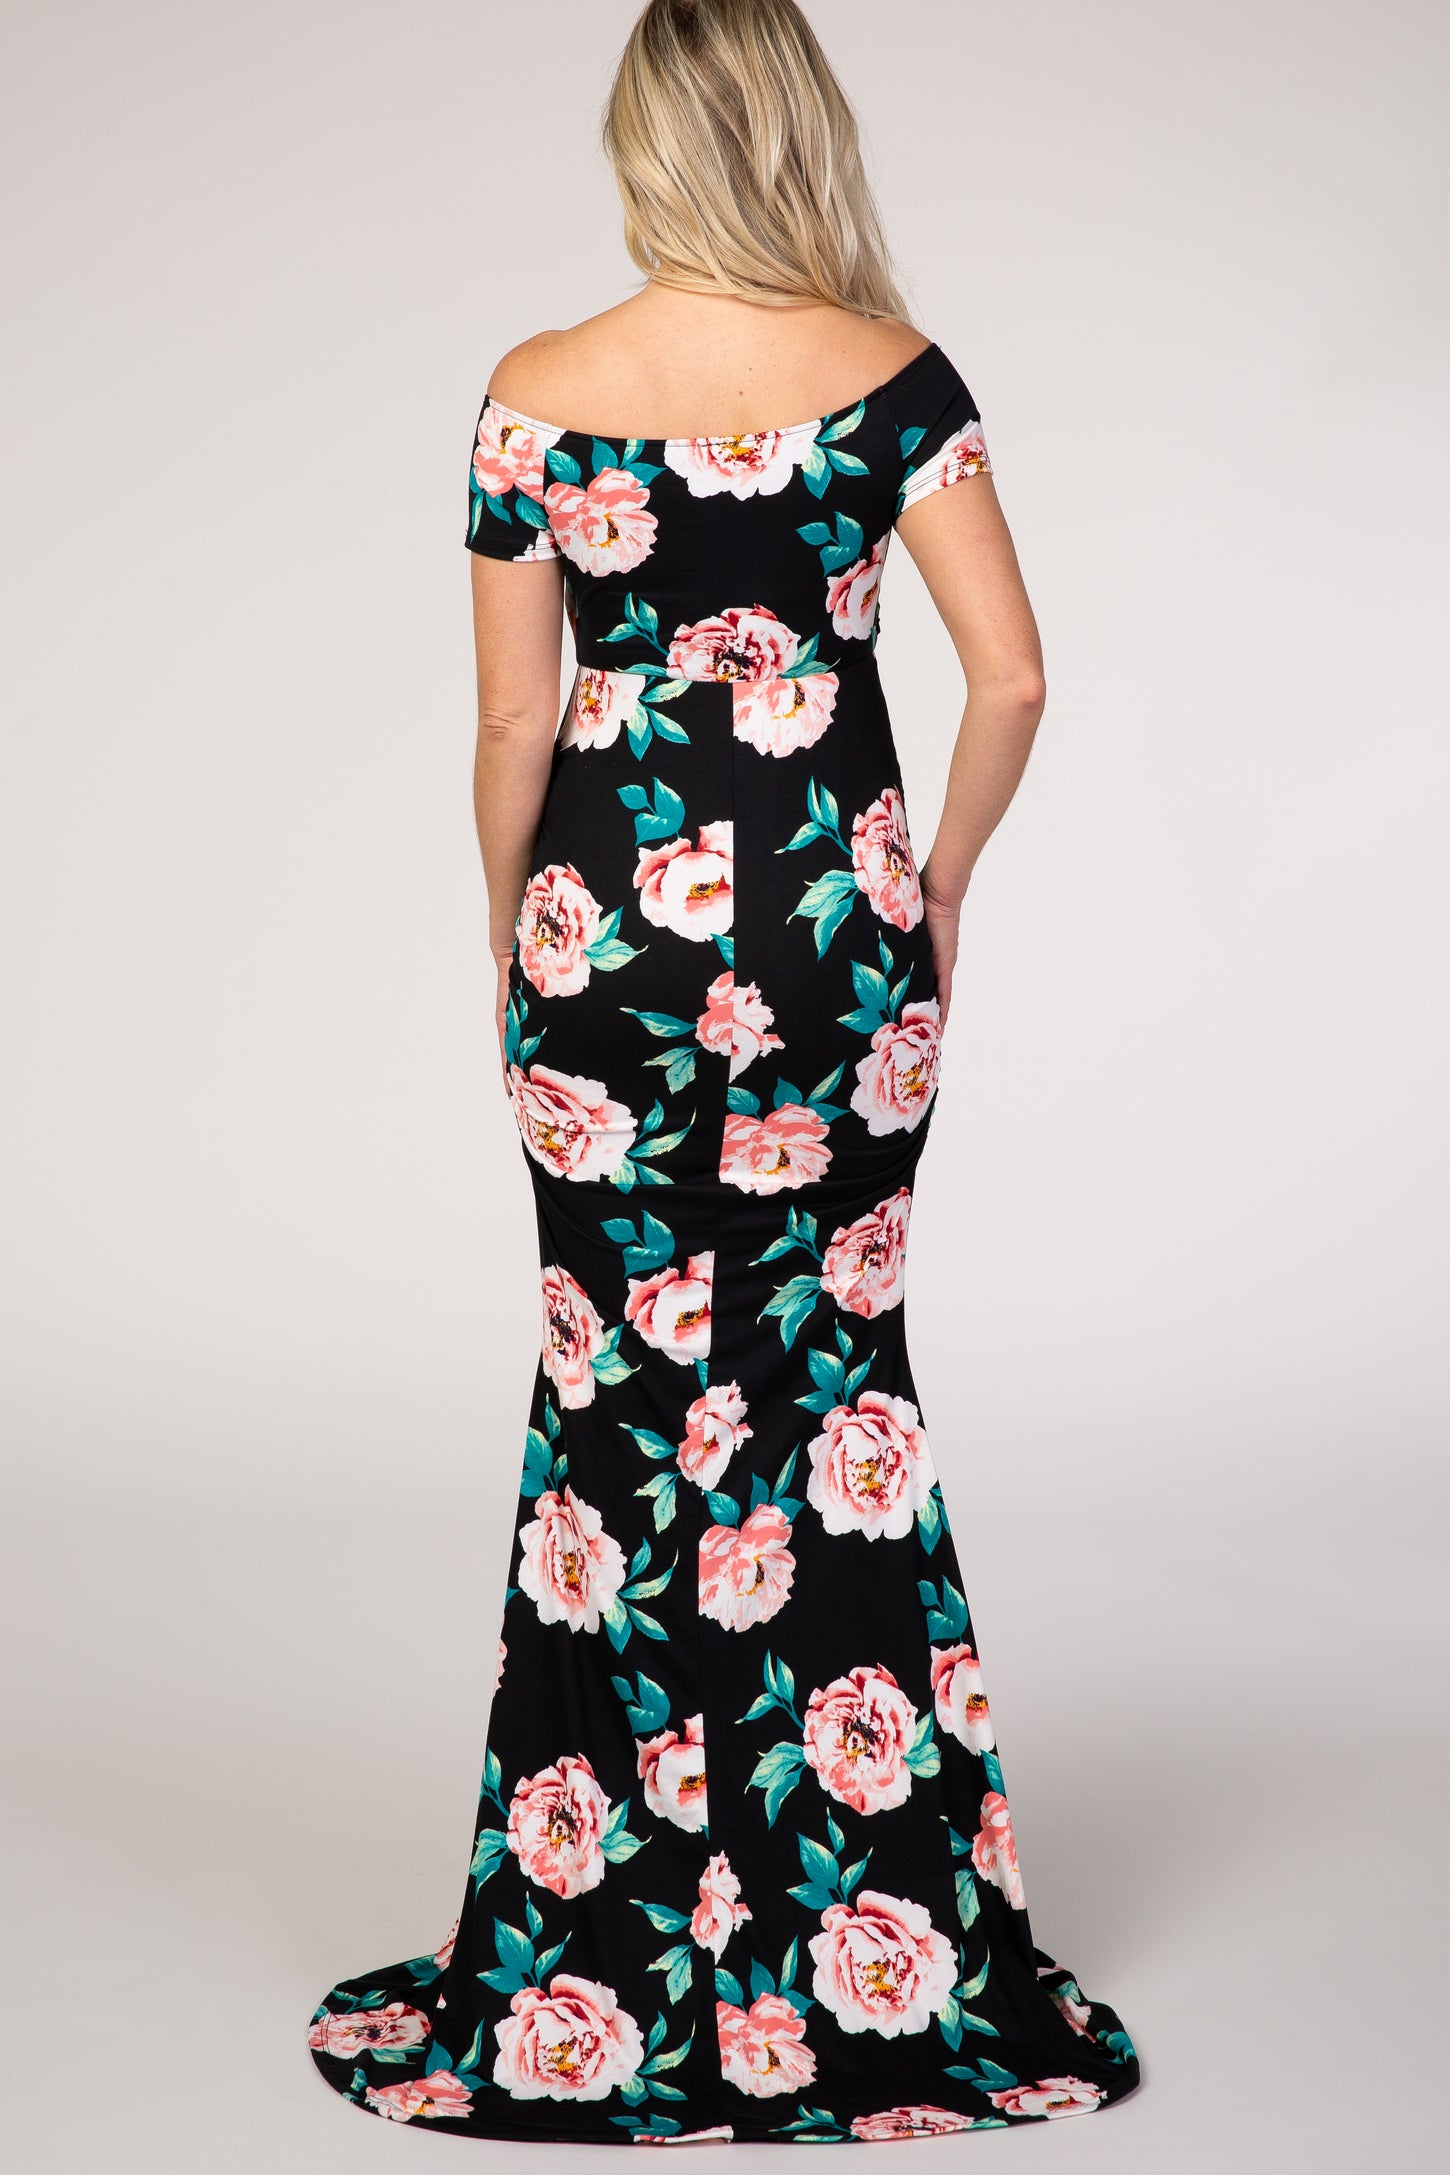 PinkBlush Black Floral Off Shoulder Wrap Maternity Photoshoot Gown/Dress